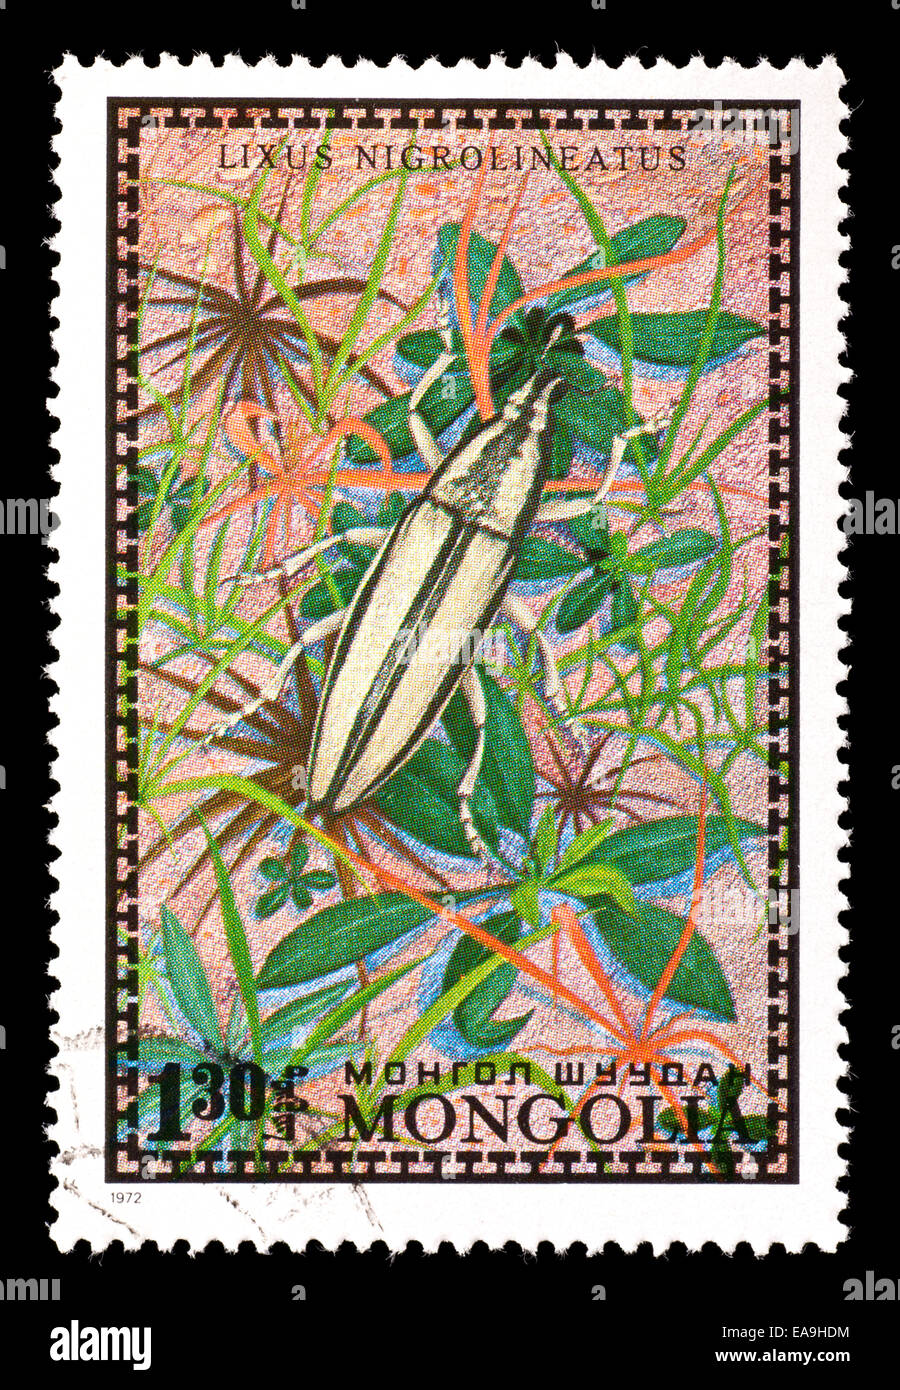 Postage stamp from Mongolia depicting a weevil (Lixus nigrolineatus) Stock Photo